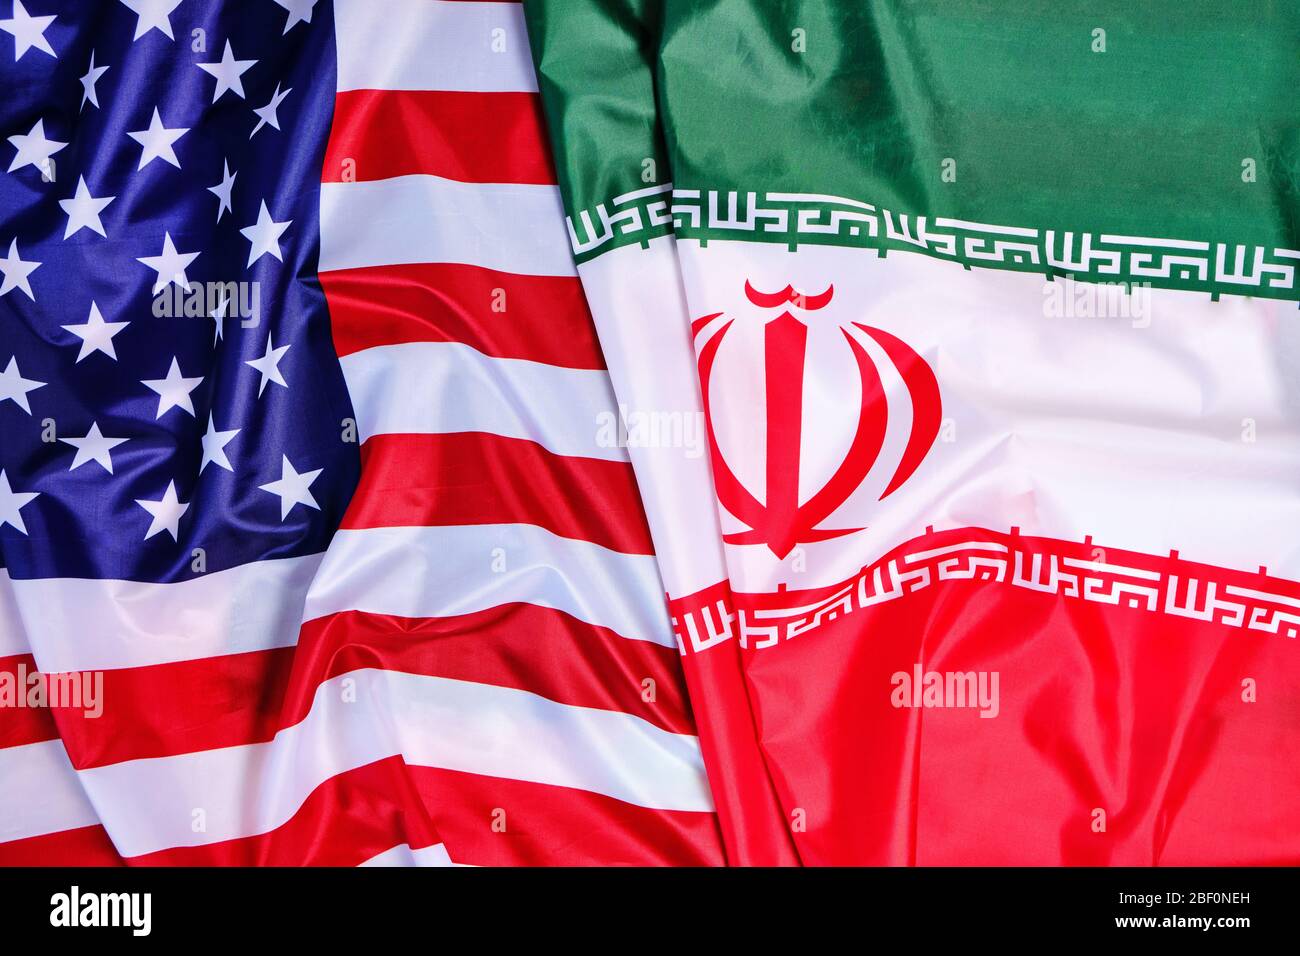 Flag of the United States of America and Iran Stock Photo